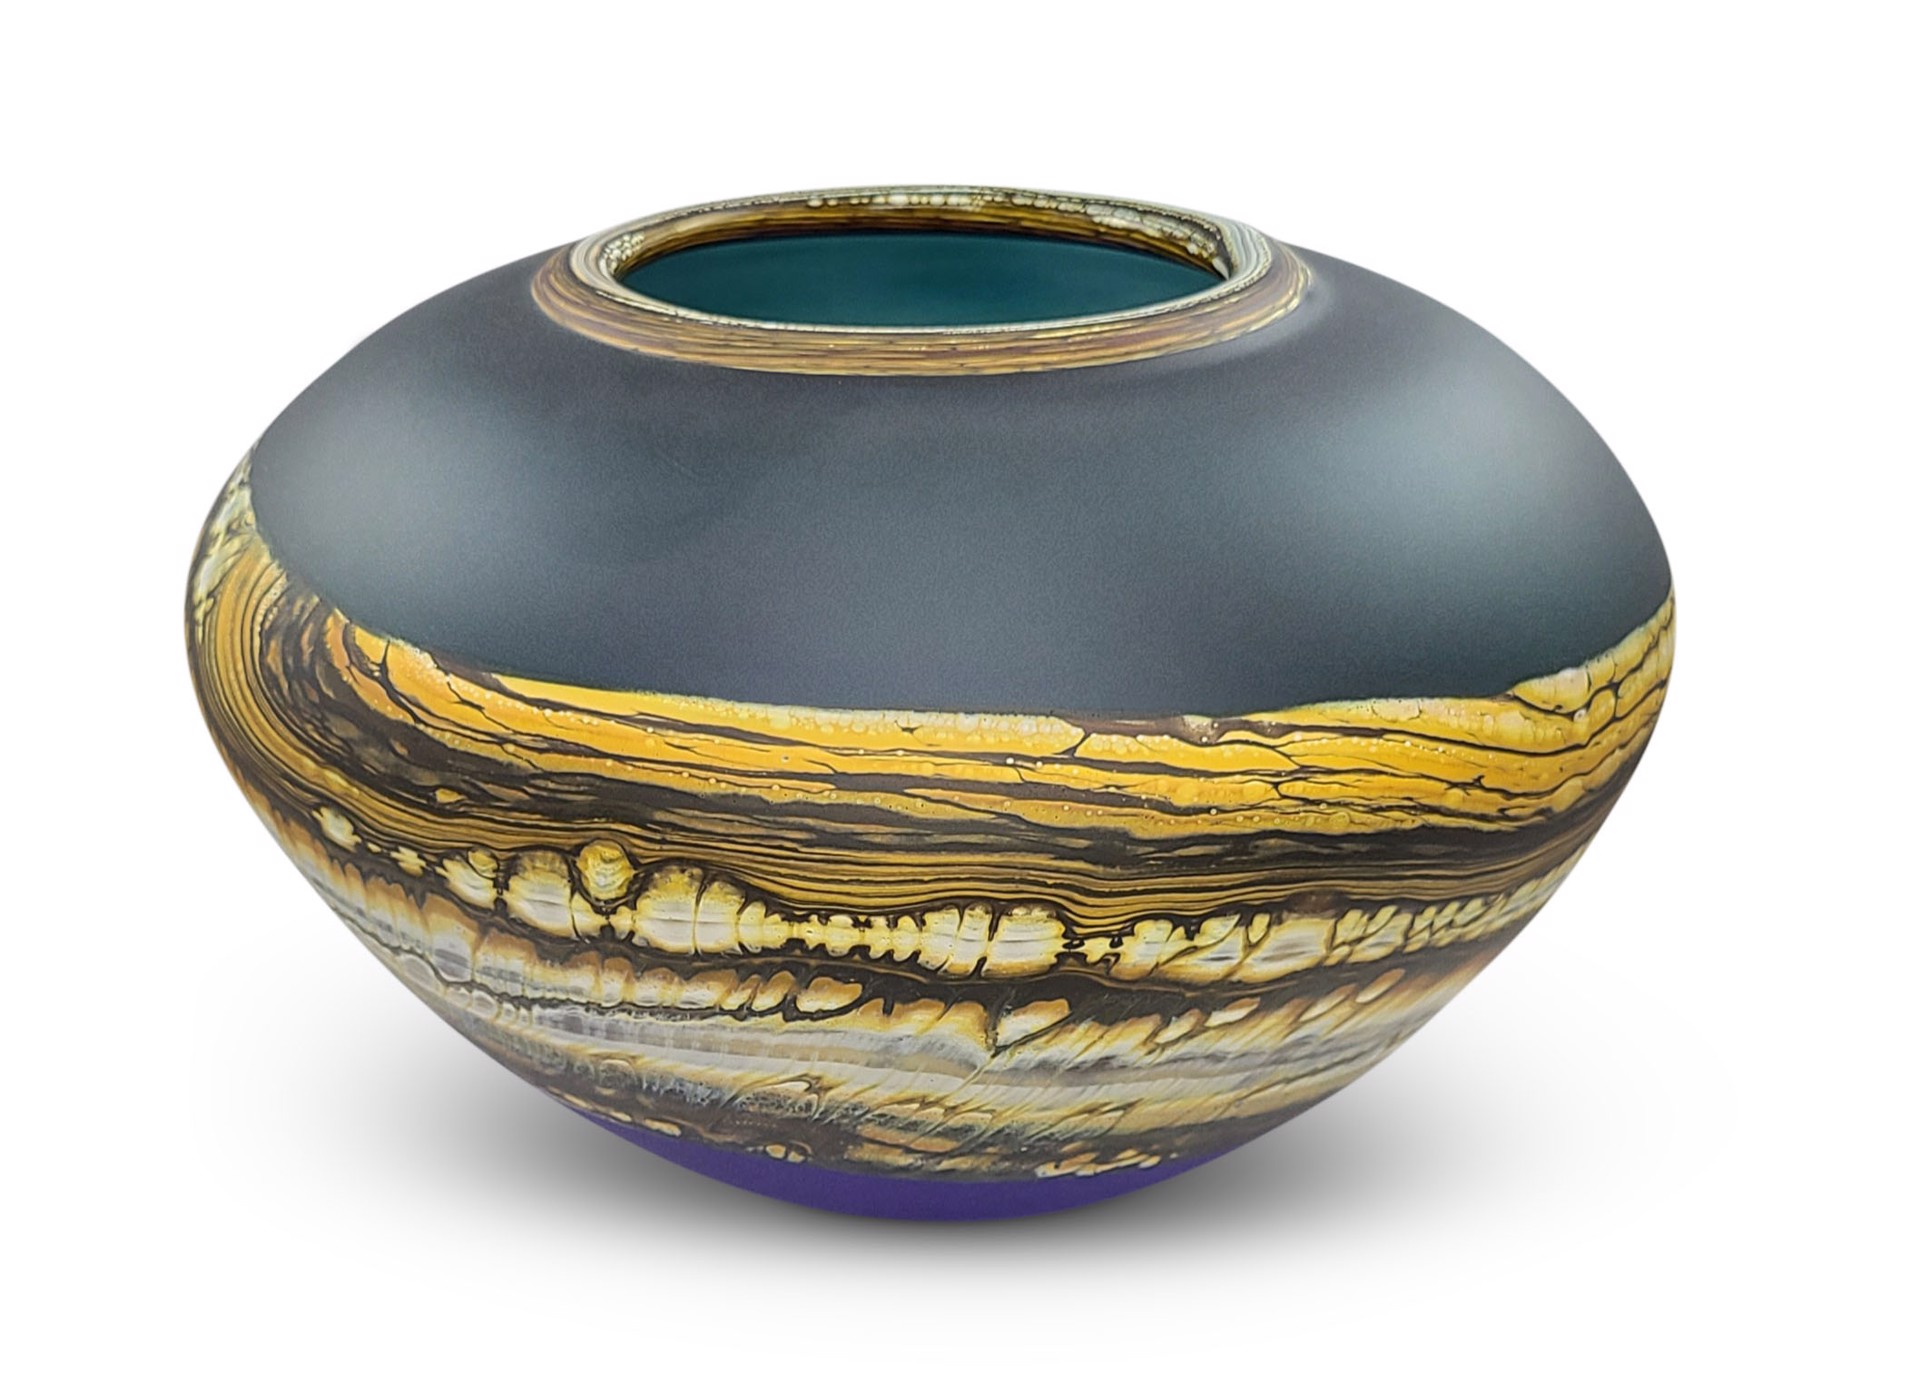 Sage and Cobalt Open Bowl with Satin Finish by Danielle Blade Stephen Gartner